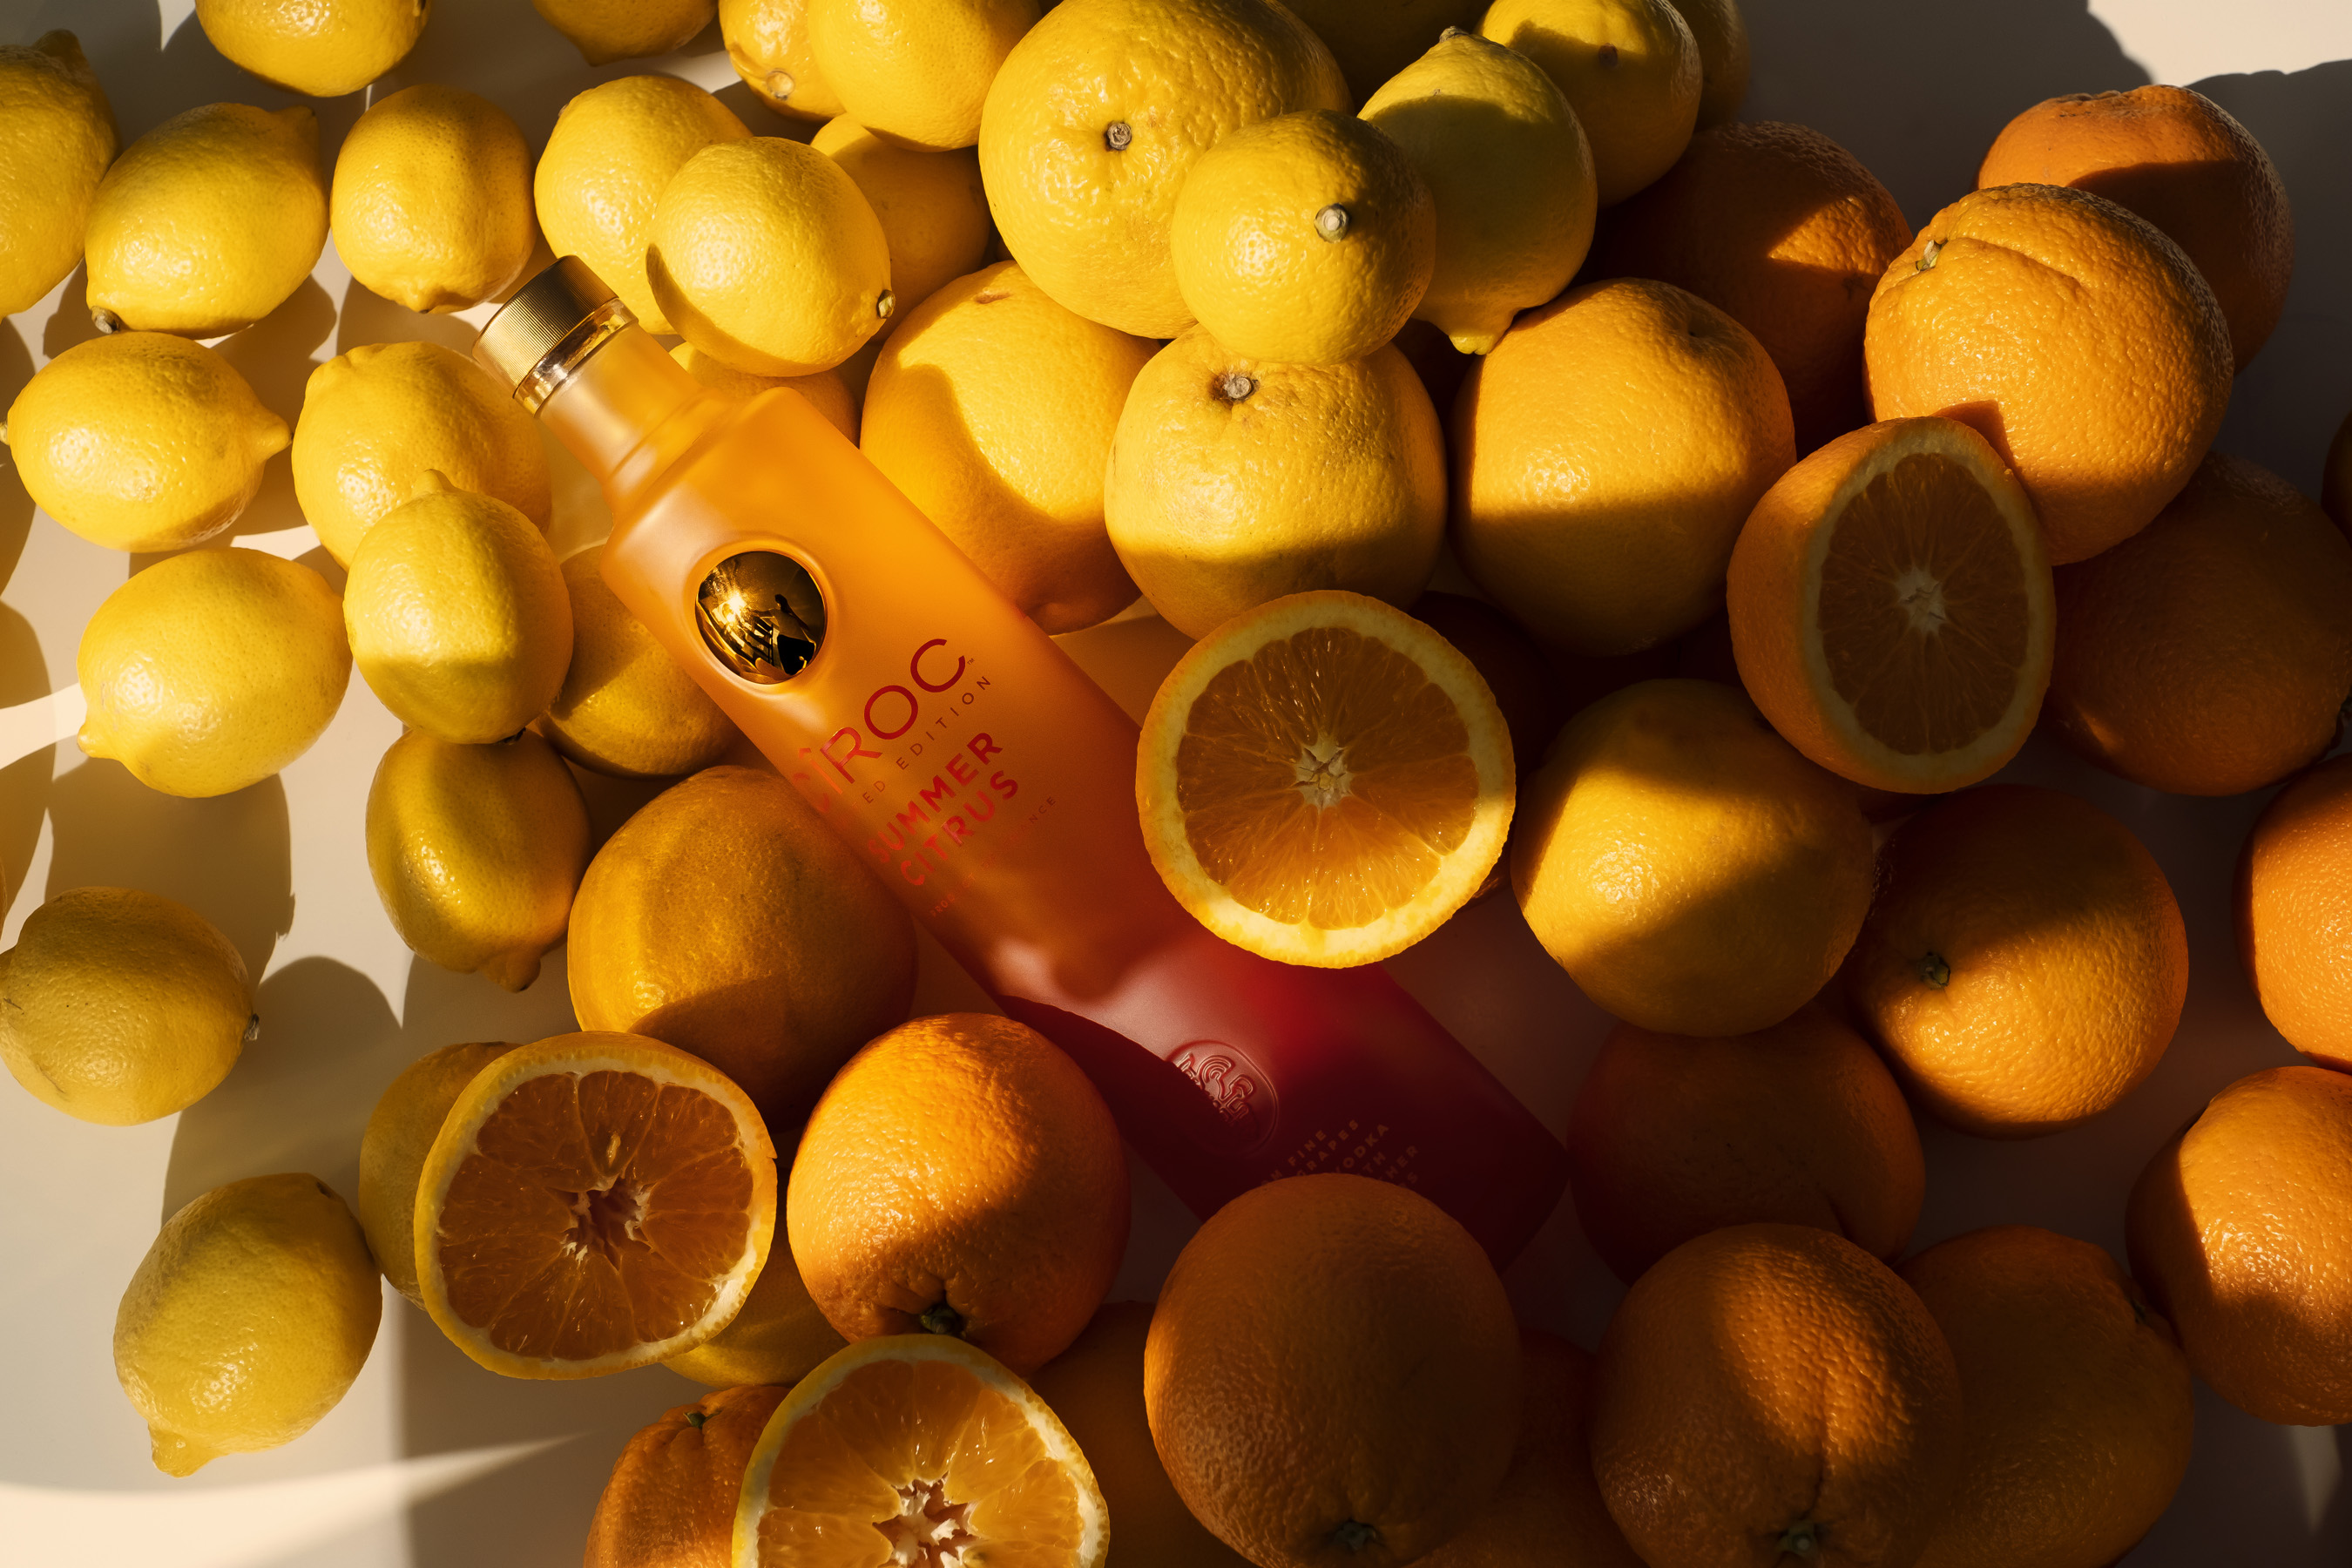 CÎROC Summer Citrus, Infused With A Blend of Natural Orange and Citrus Flavors